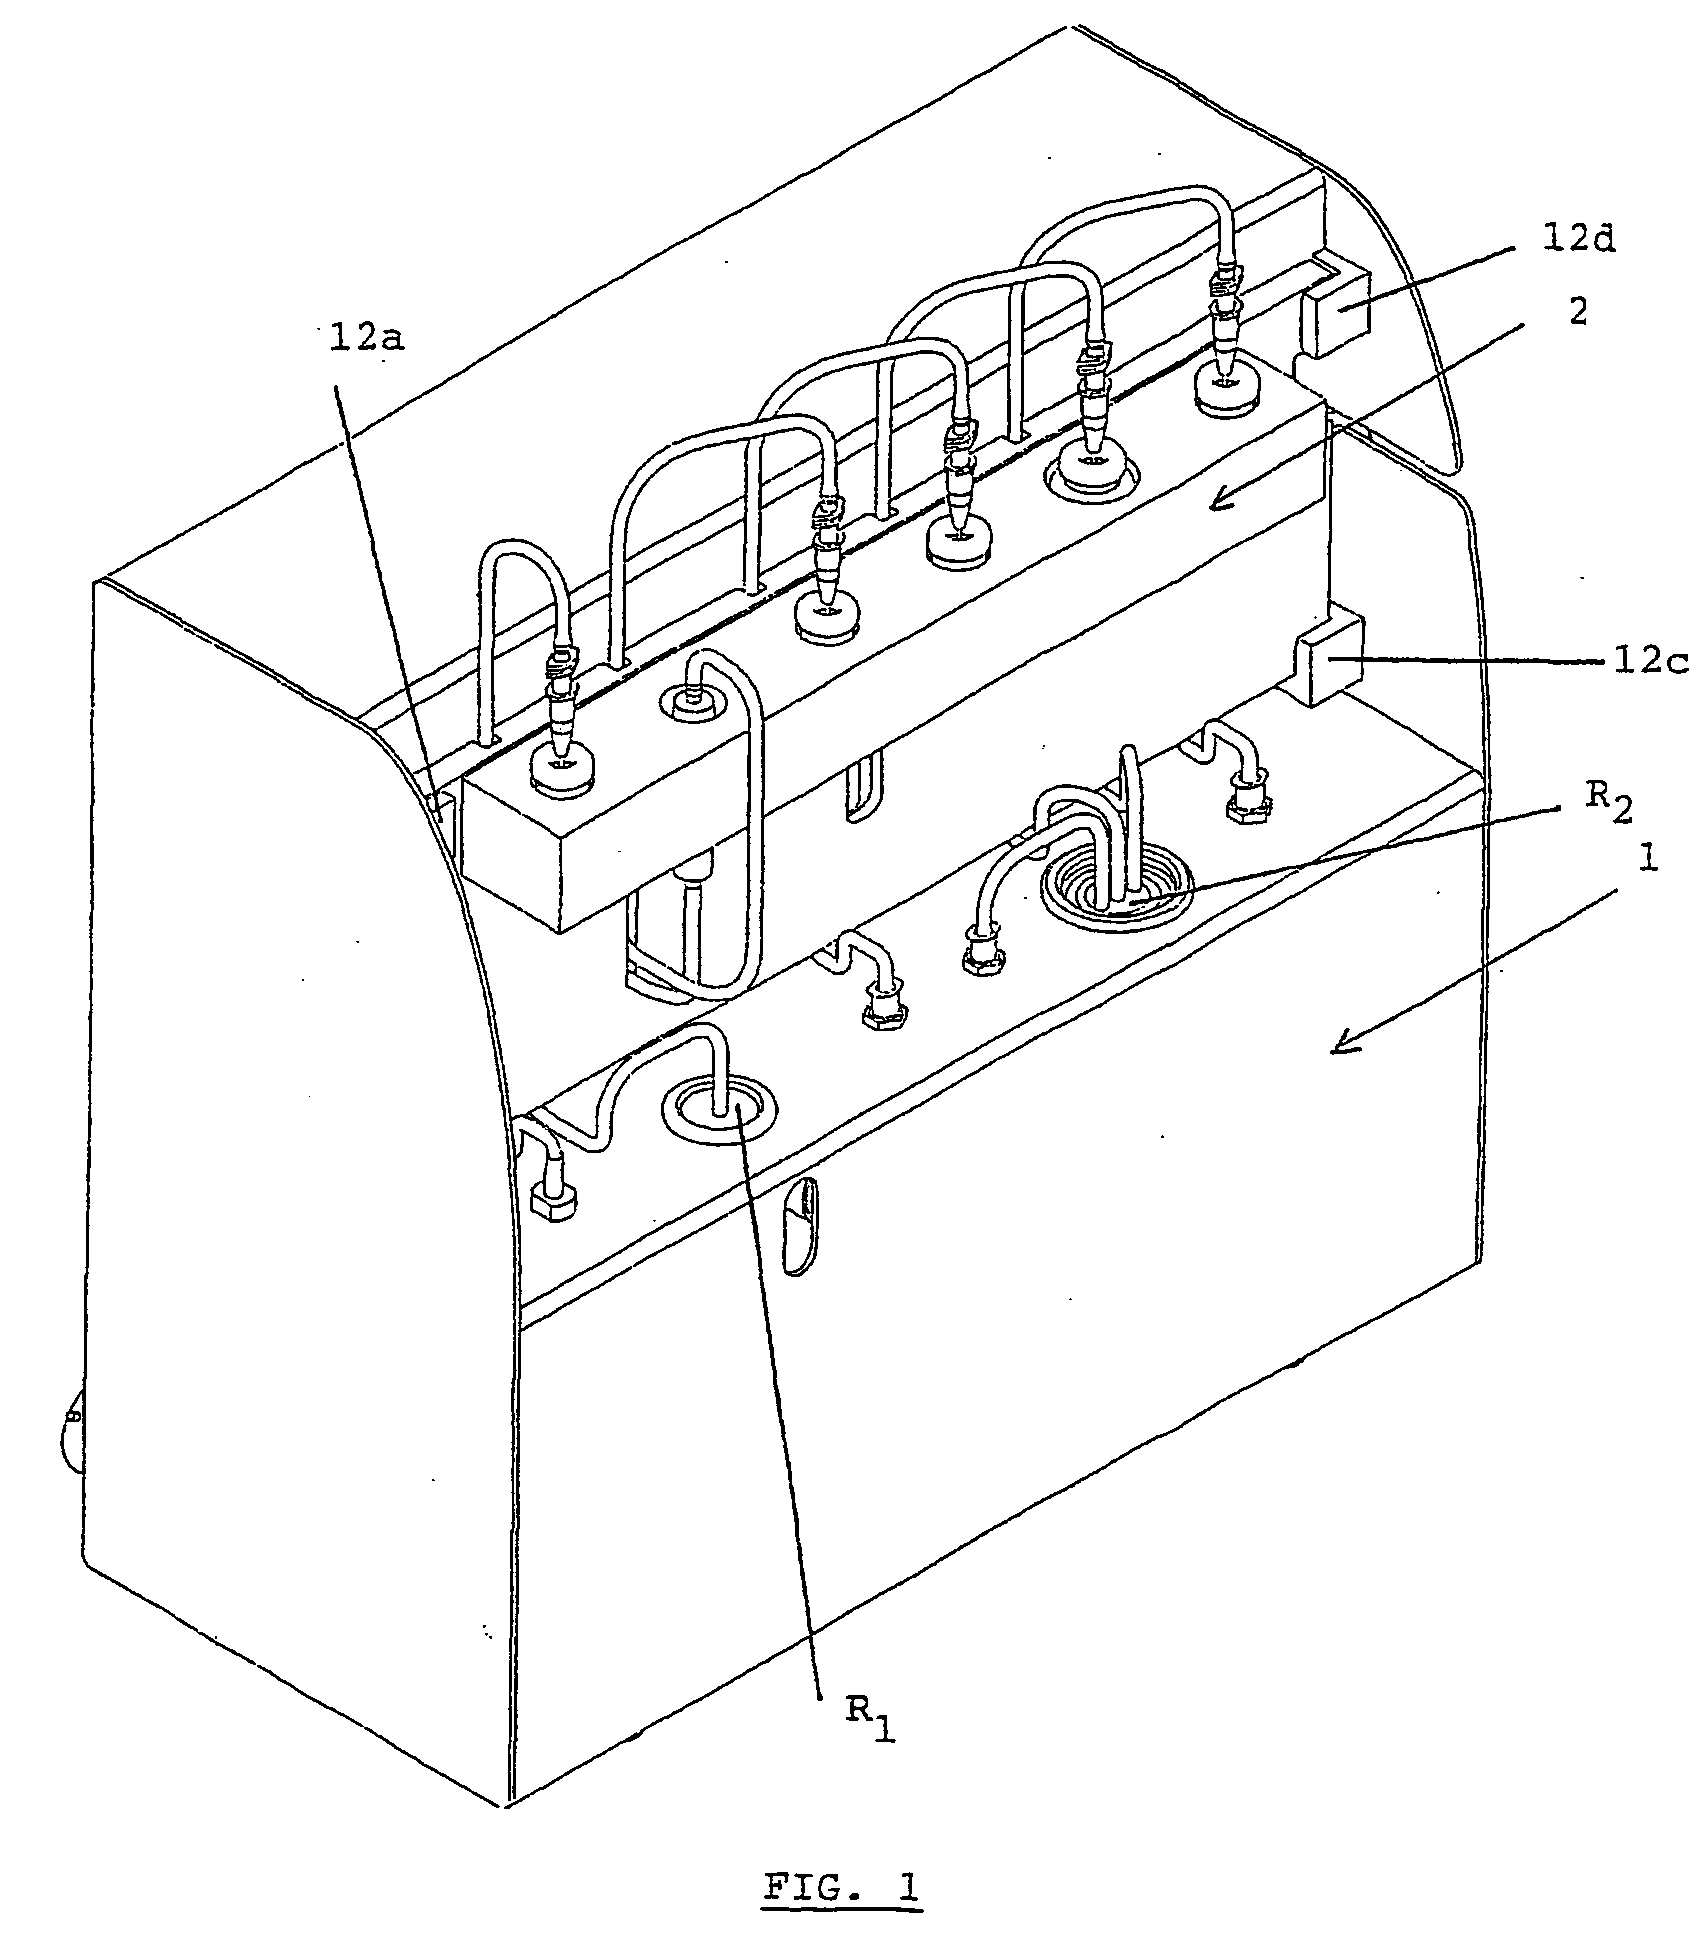 Device for synthesis of radiopharmaceutical products